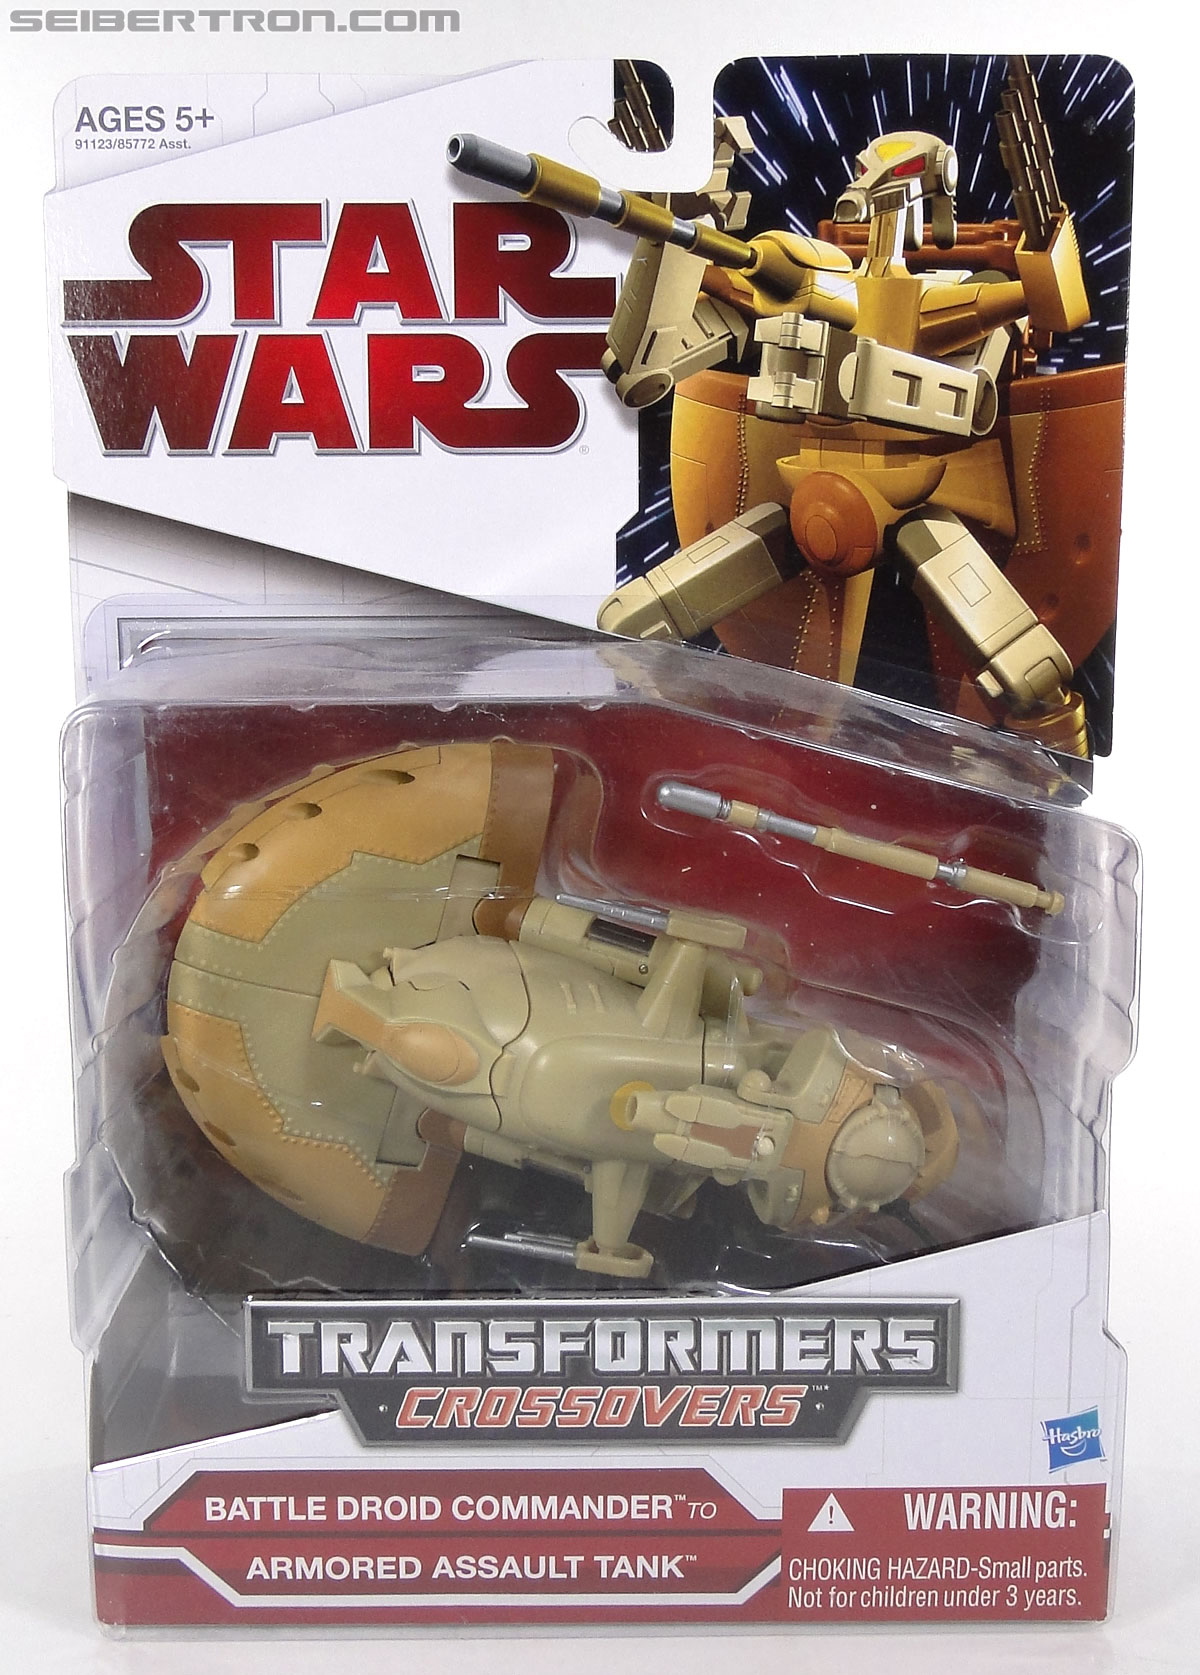 Star Wars Transformers Battle Droid Commader (Armored Assault Tank) (Battle Droid Commader) (Image #1 of 85)